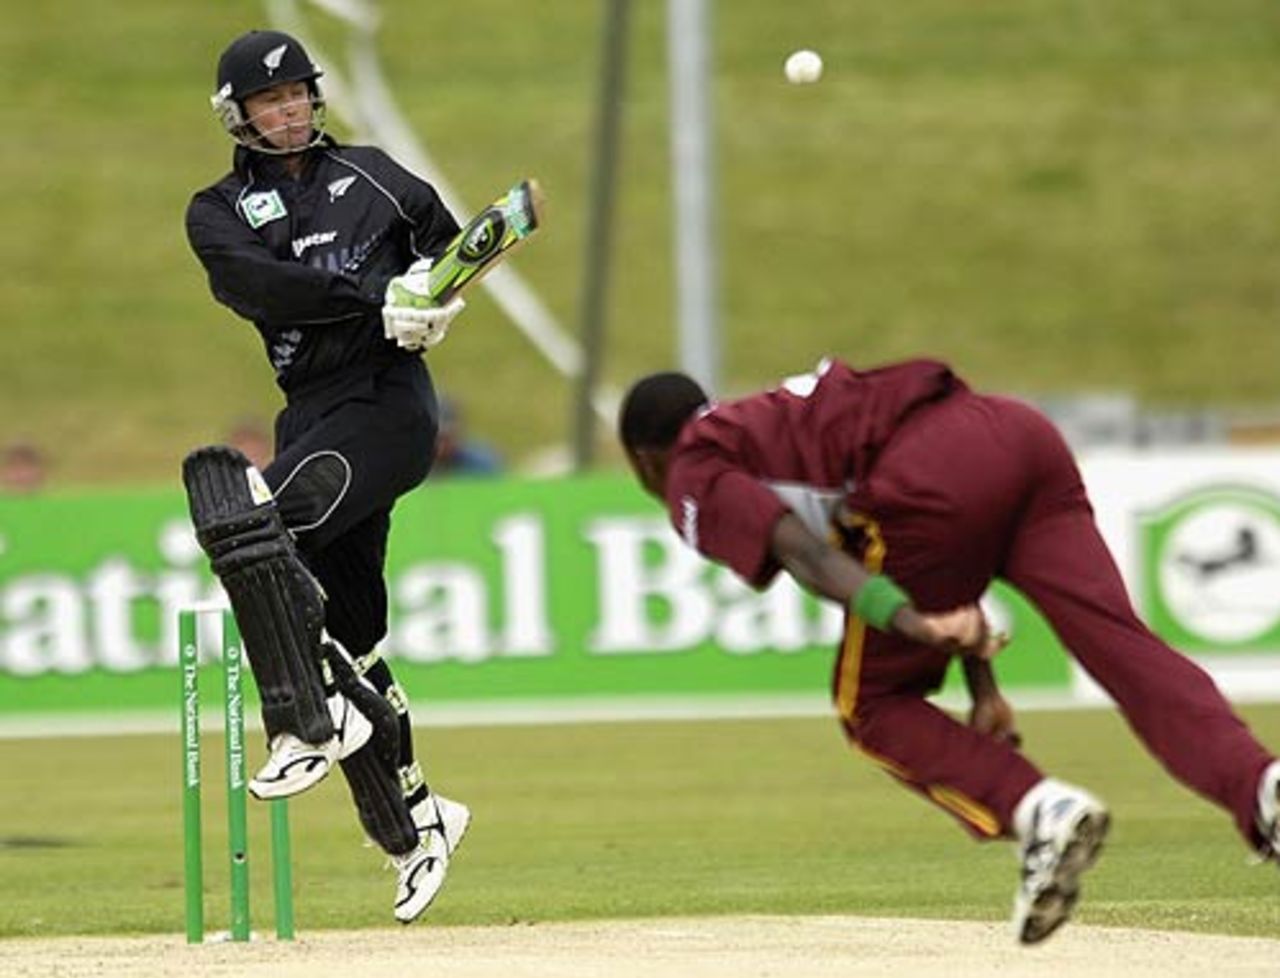 Nathan Astle holes out off Fidel Edwards, New Zealand v West Indies, 2nd ODI, Queenstown, February 22, 2006